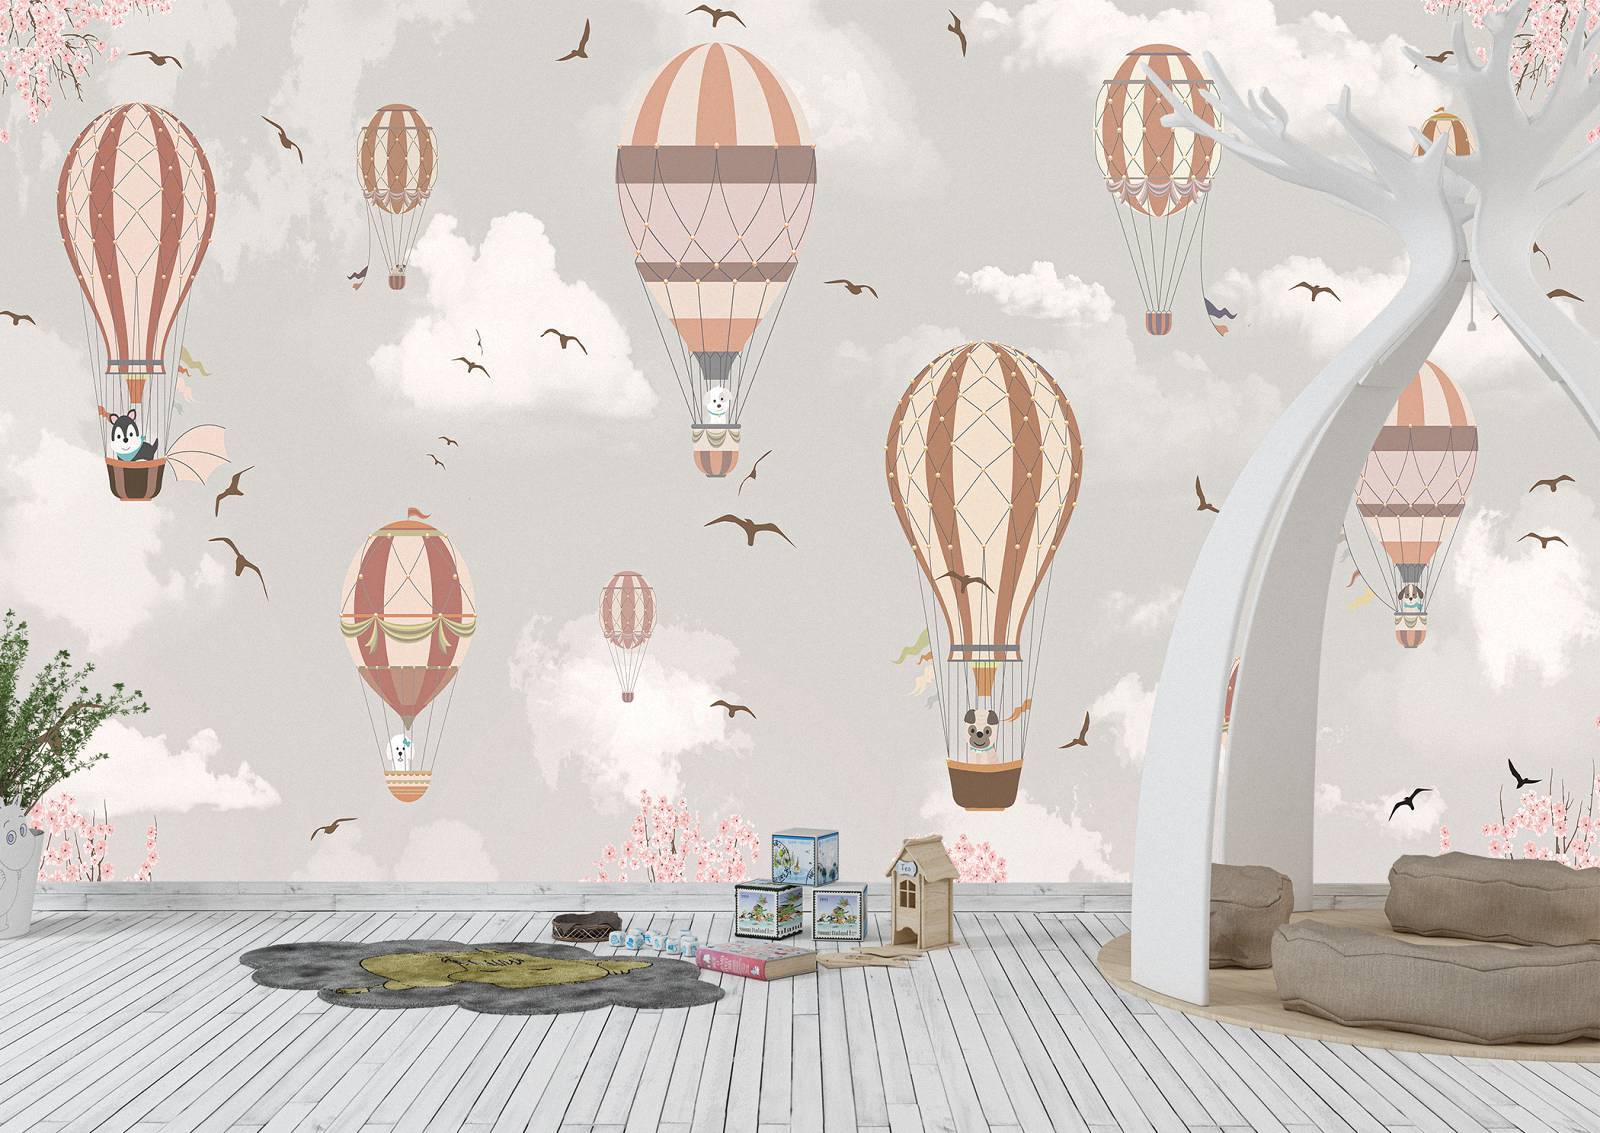 Animals in Balloons Kids Room Wall Mural Photo